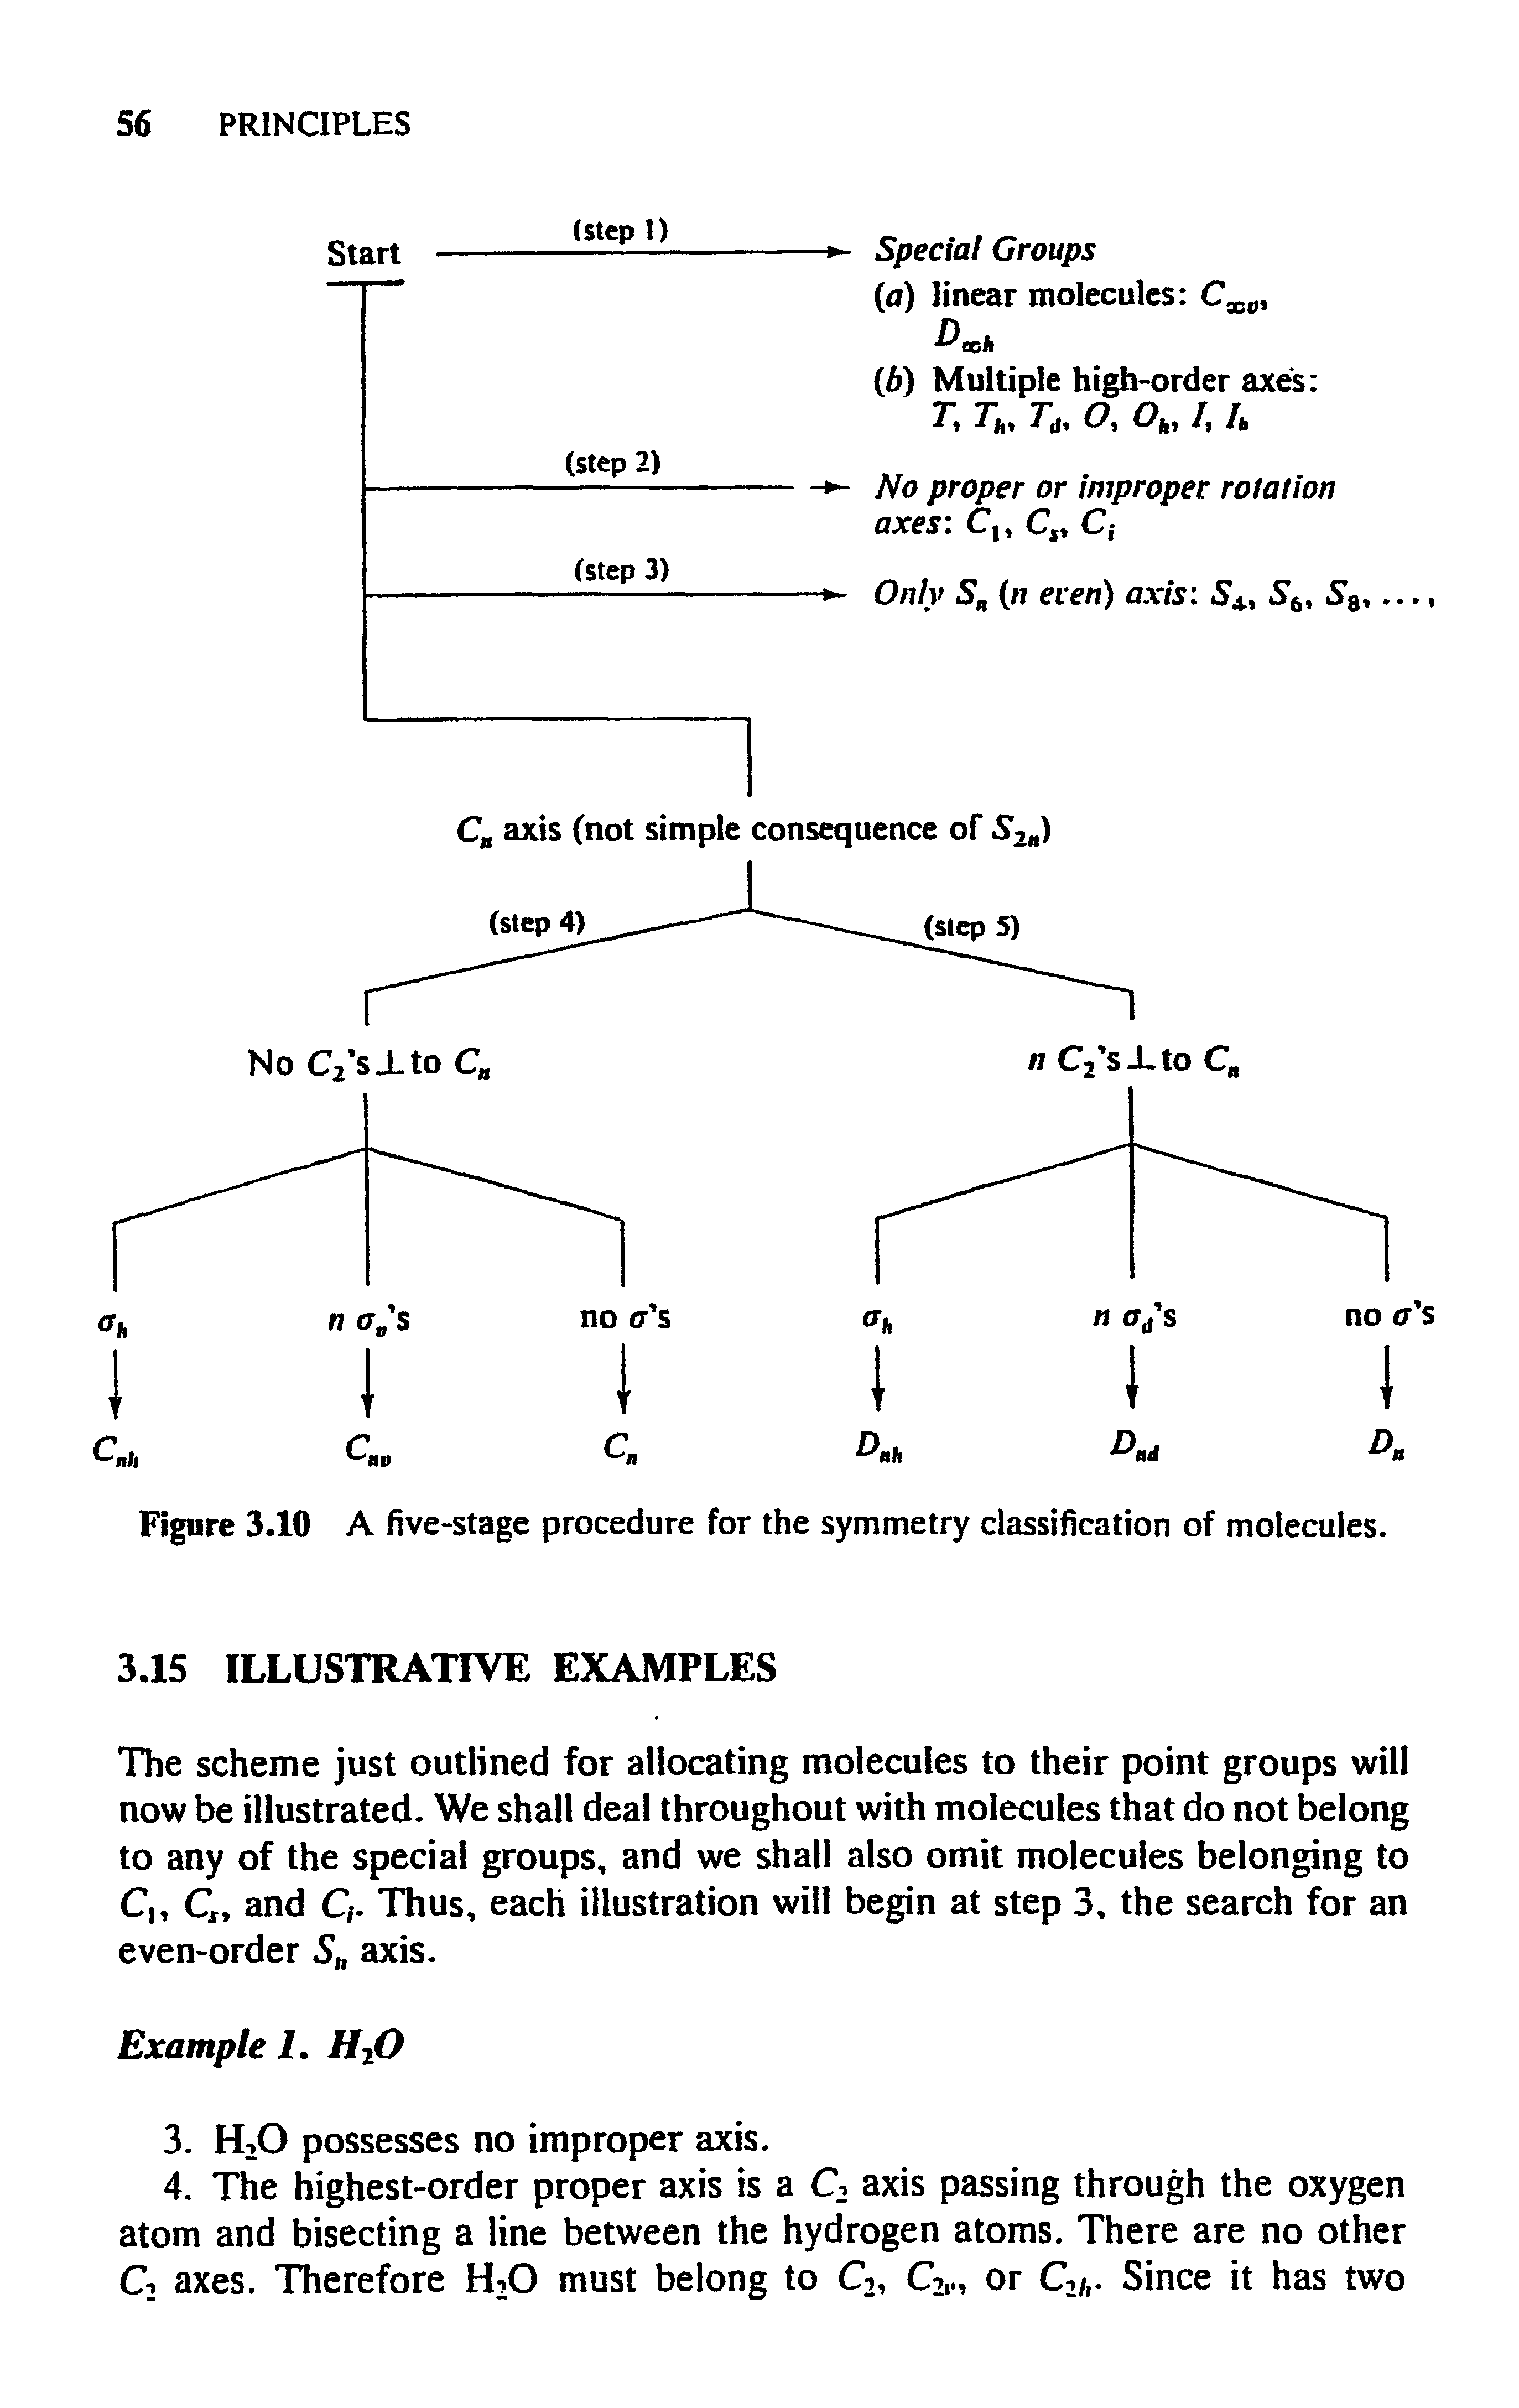 Figure 3.10 A five-stage procedure for the symmetry classification of molecules.